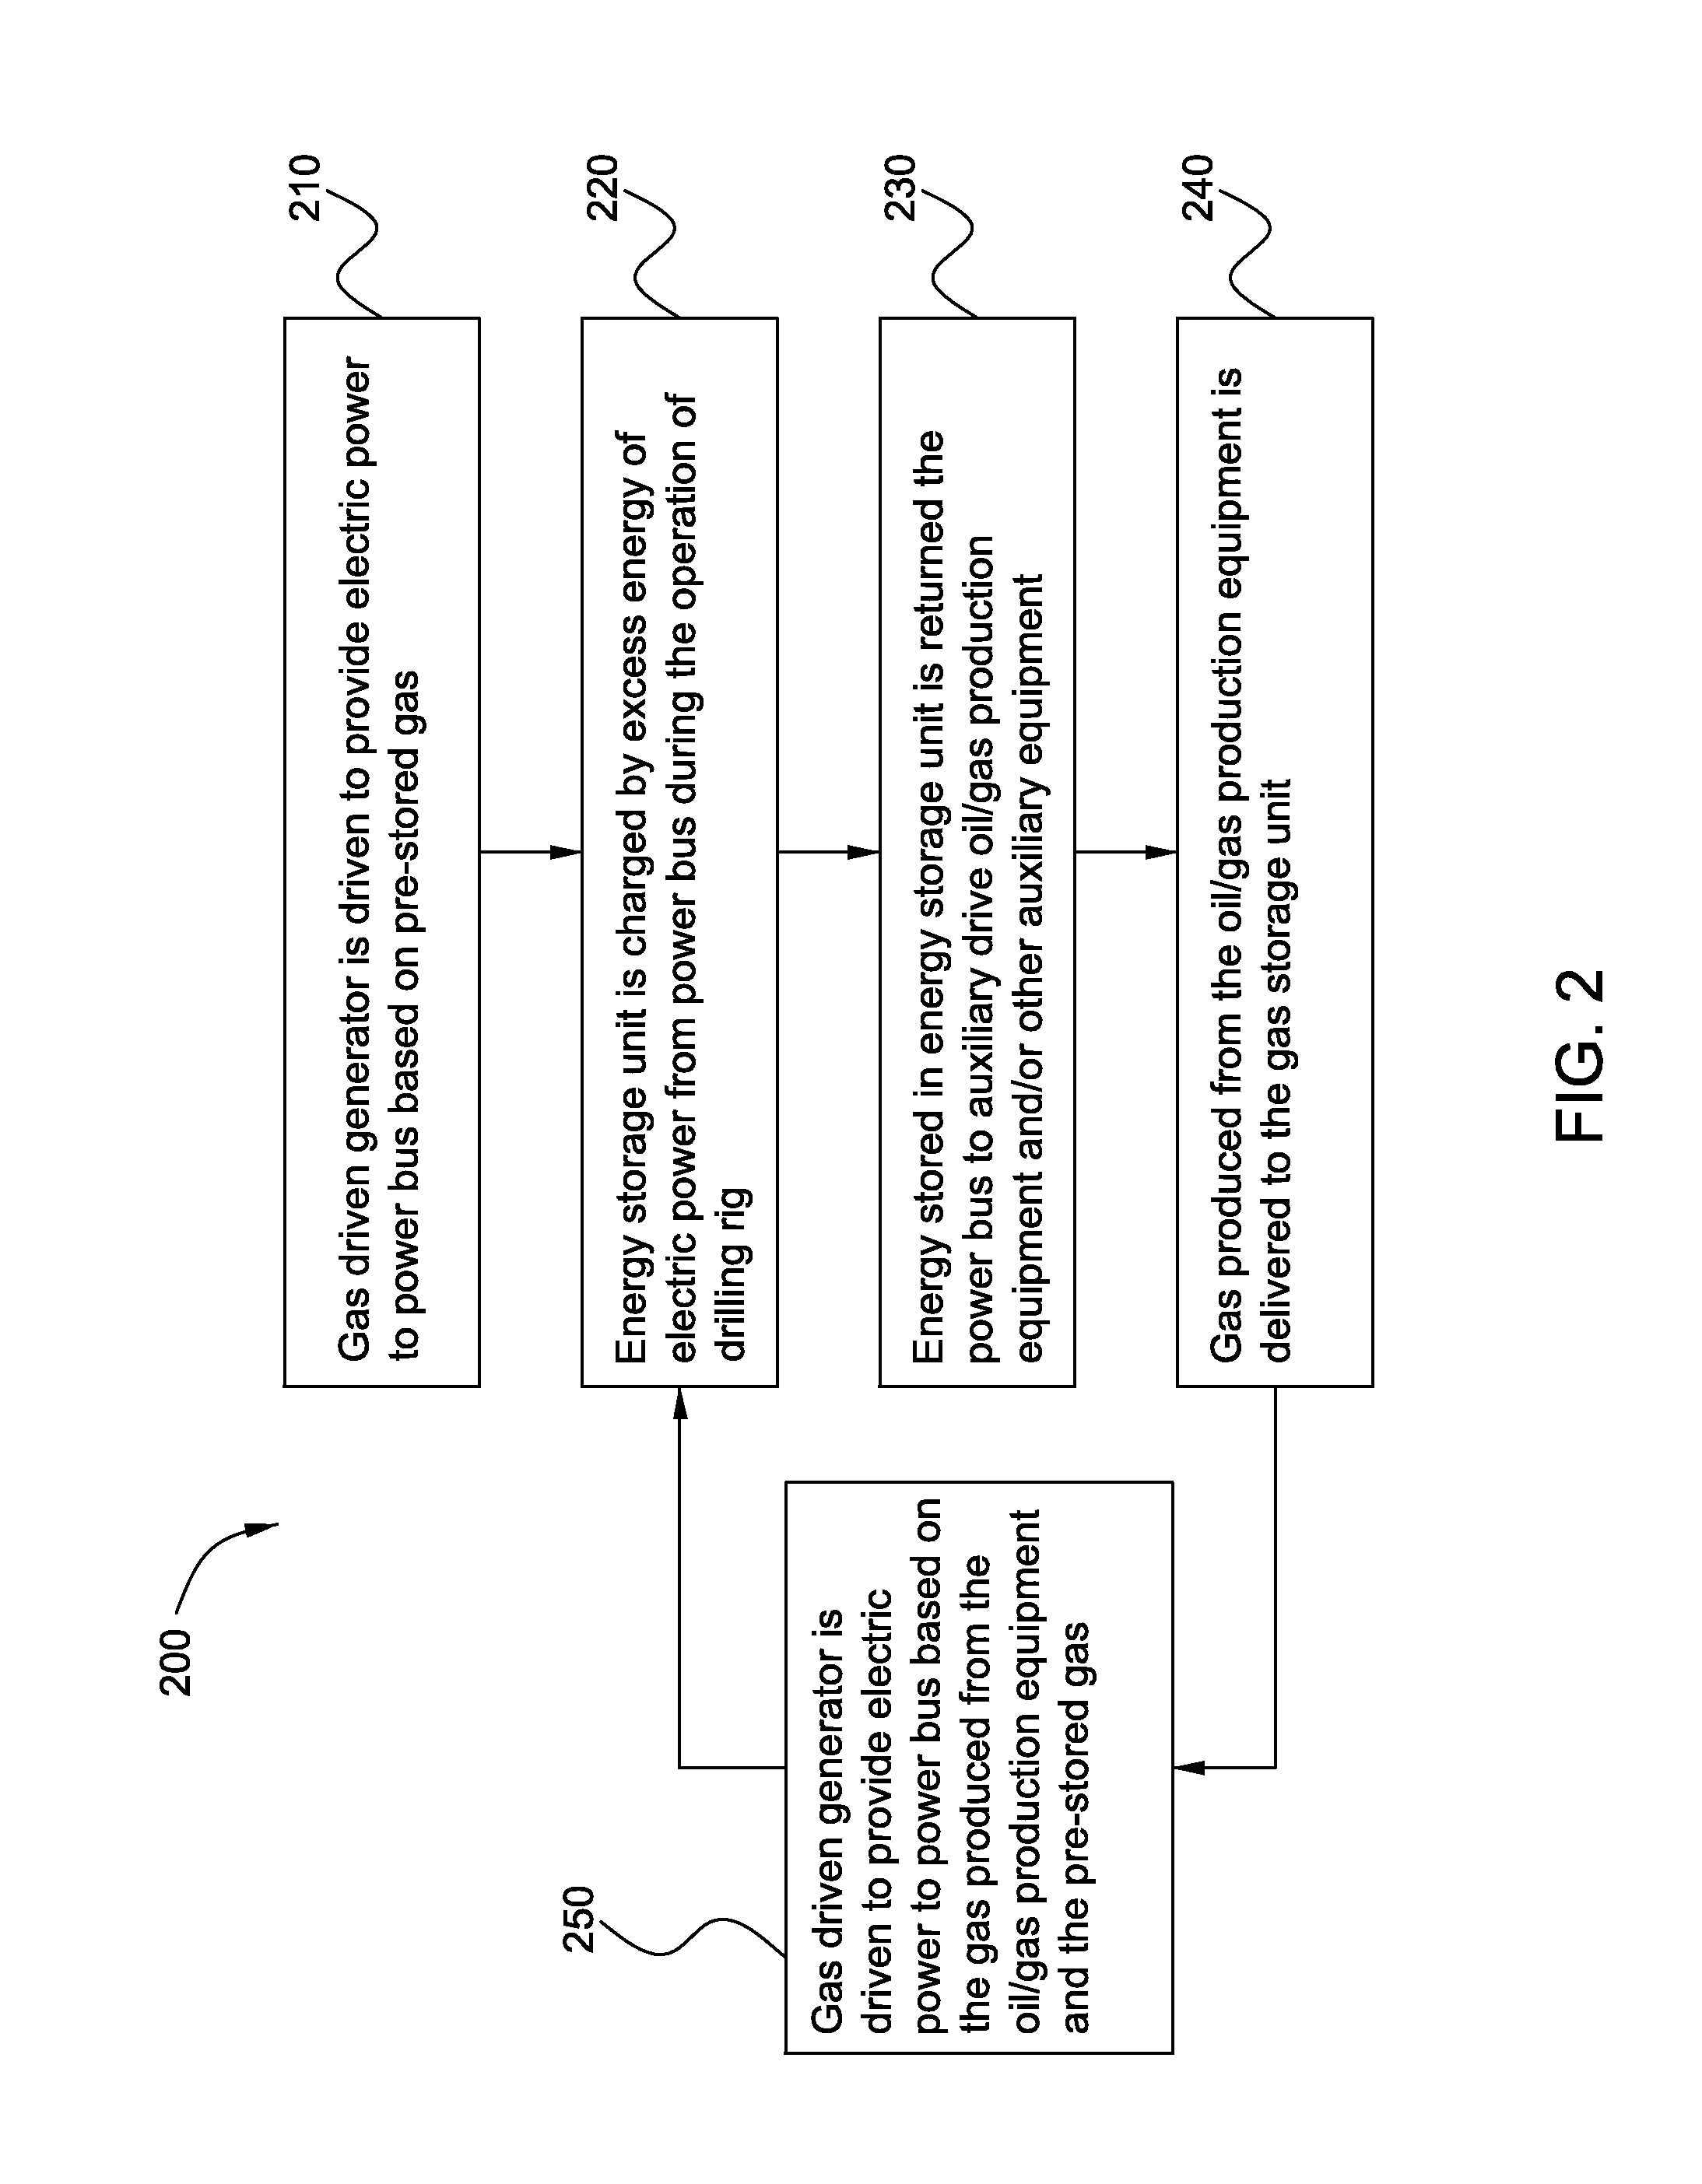 Power integrated system and method for drilling rig and oil/gas production equipment